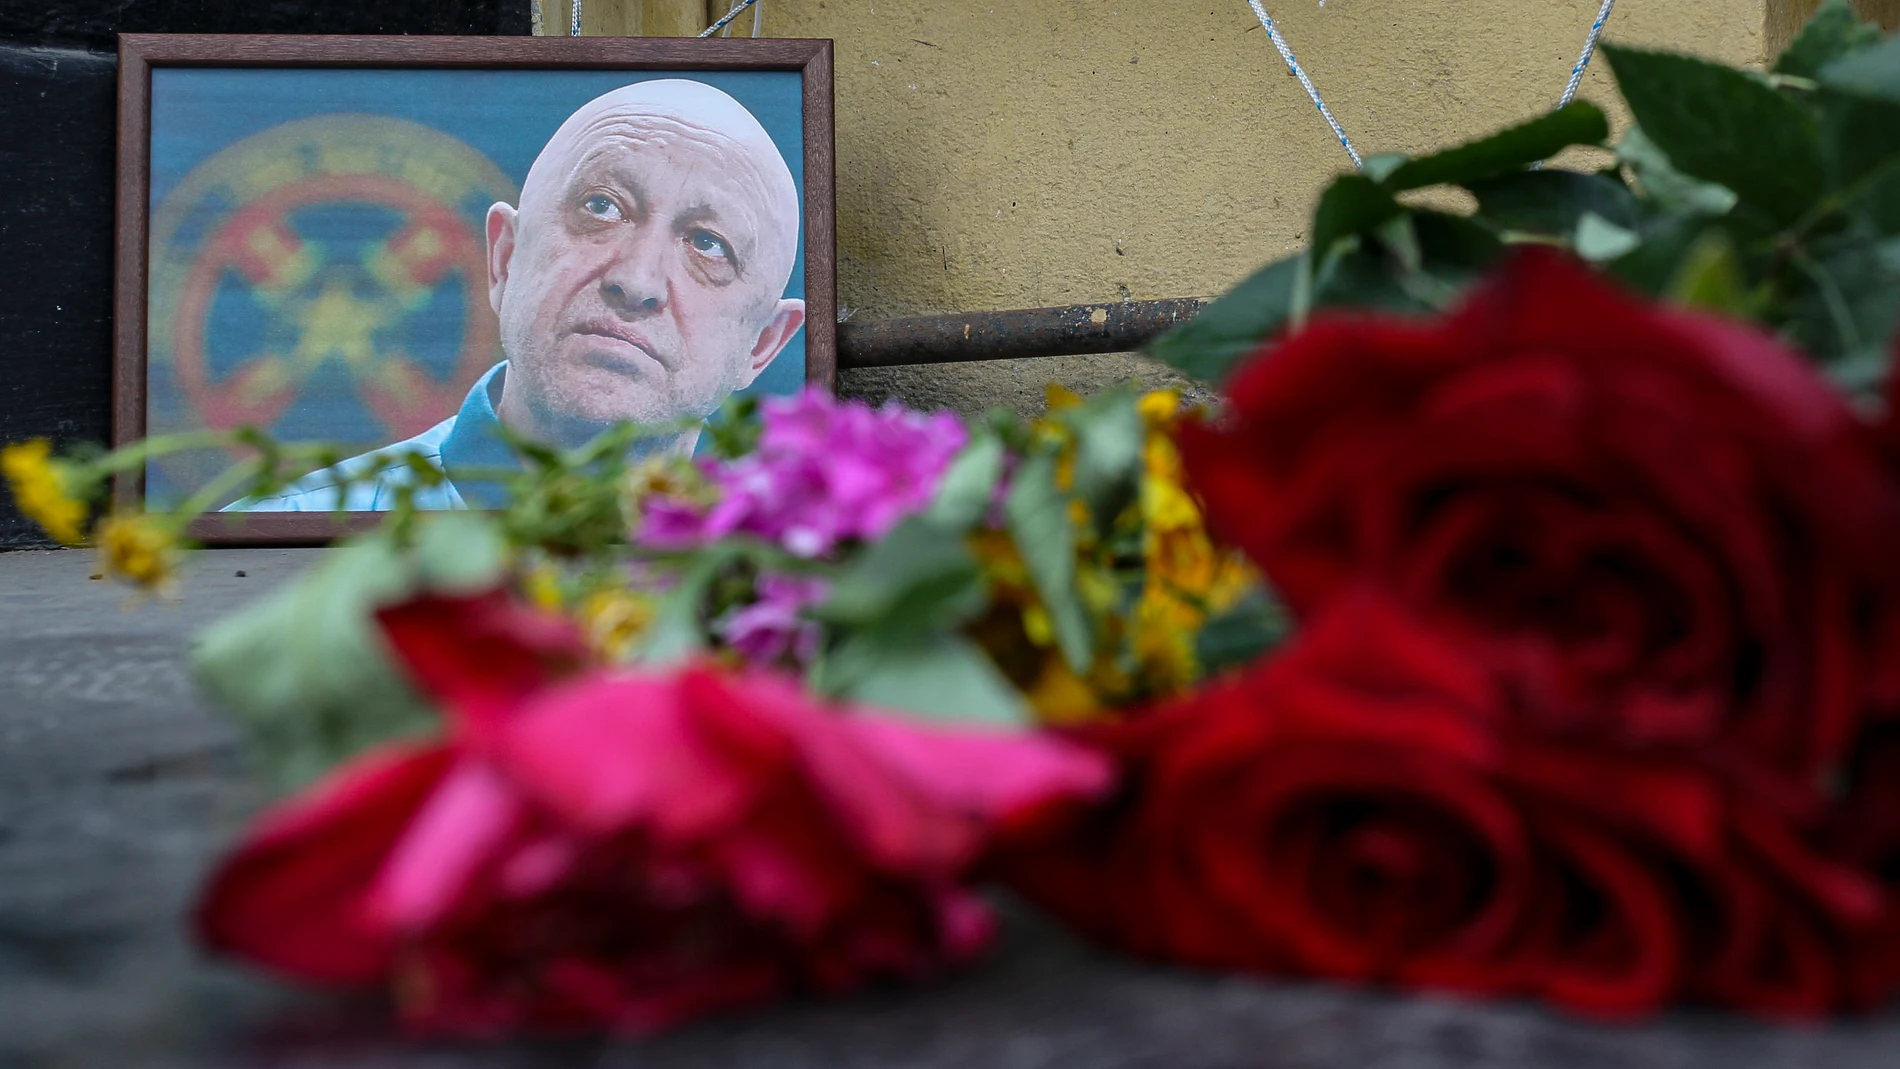 Rostov-on-don (Russian Federation), 24/08/2023.- A picture of PMC Wagner chief Yevgeny Prigozhin is seen at an informal memorial in downtown of Rostov-on Don, Russia, 24 August 2023. An investigation was launched into the crash of an aircraft in the Tver region in Russia on 23 August 2023, the Russian Federal Air Transport Agency said in a statement. Among the passengers was Wagner chief Yevgeny Prigozhin, the agency reported. (Rusia, Ucrania) EFE/EPA/STRINGER 